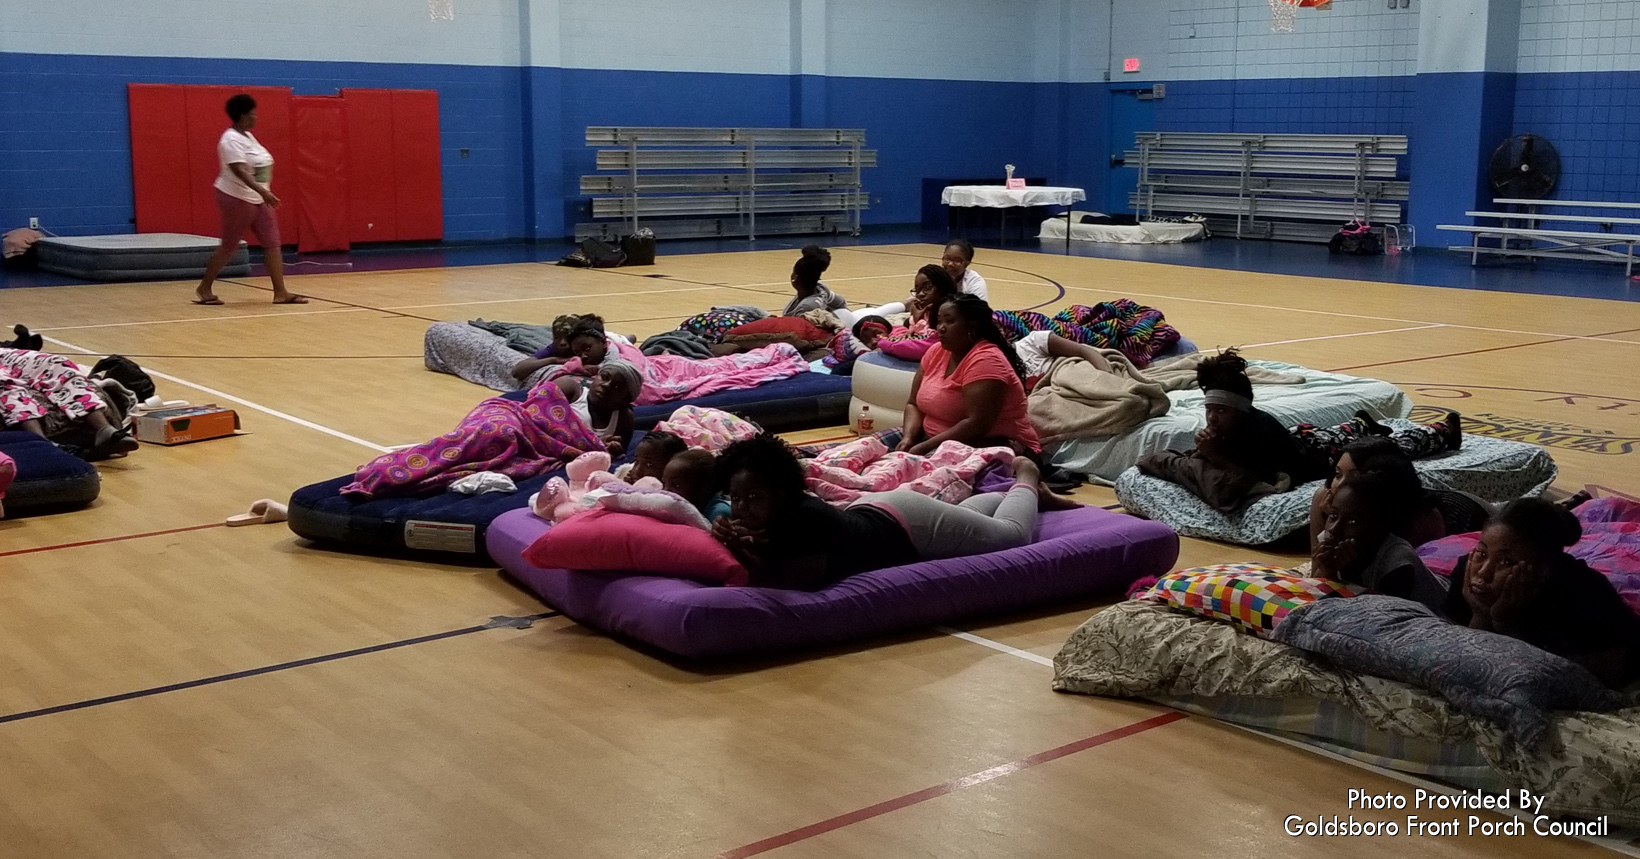 The young ladies in the sleep over were teens from the Westside Mentoring and Goldsboro Porch program. In the night the young girls discussed self-confidence, building peer relationships, and repairing mother daughter relationships.